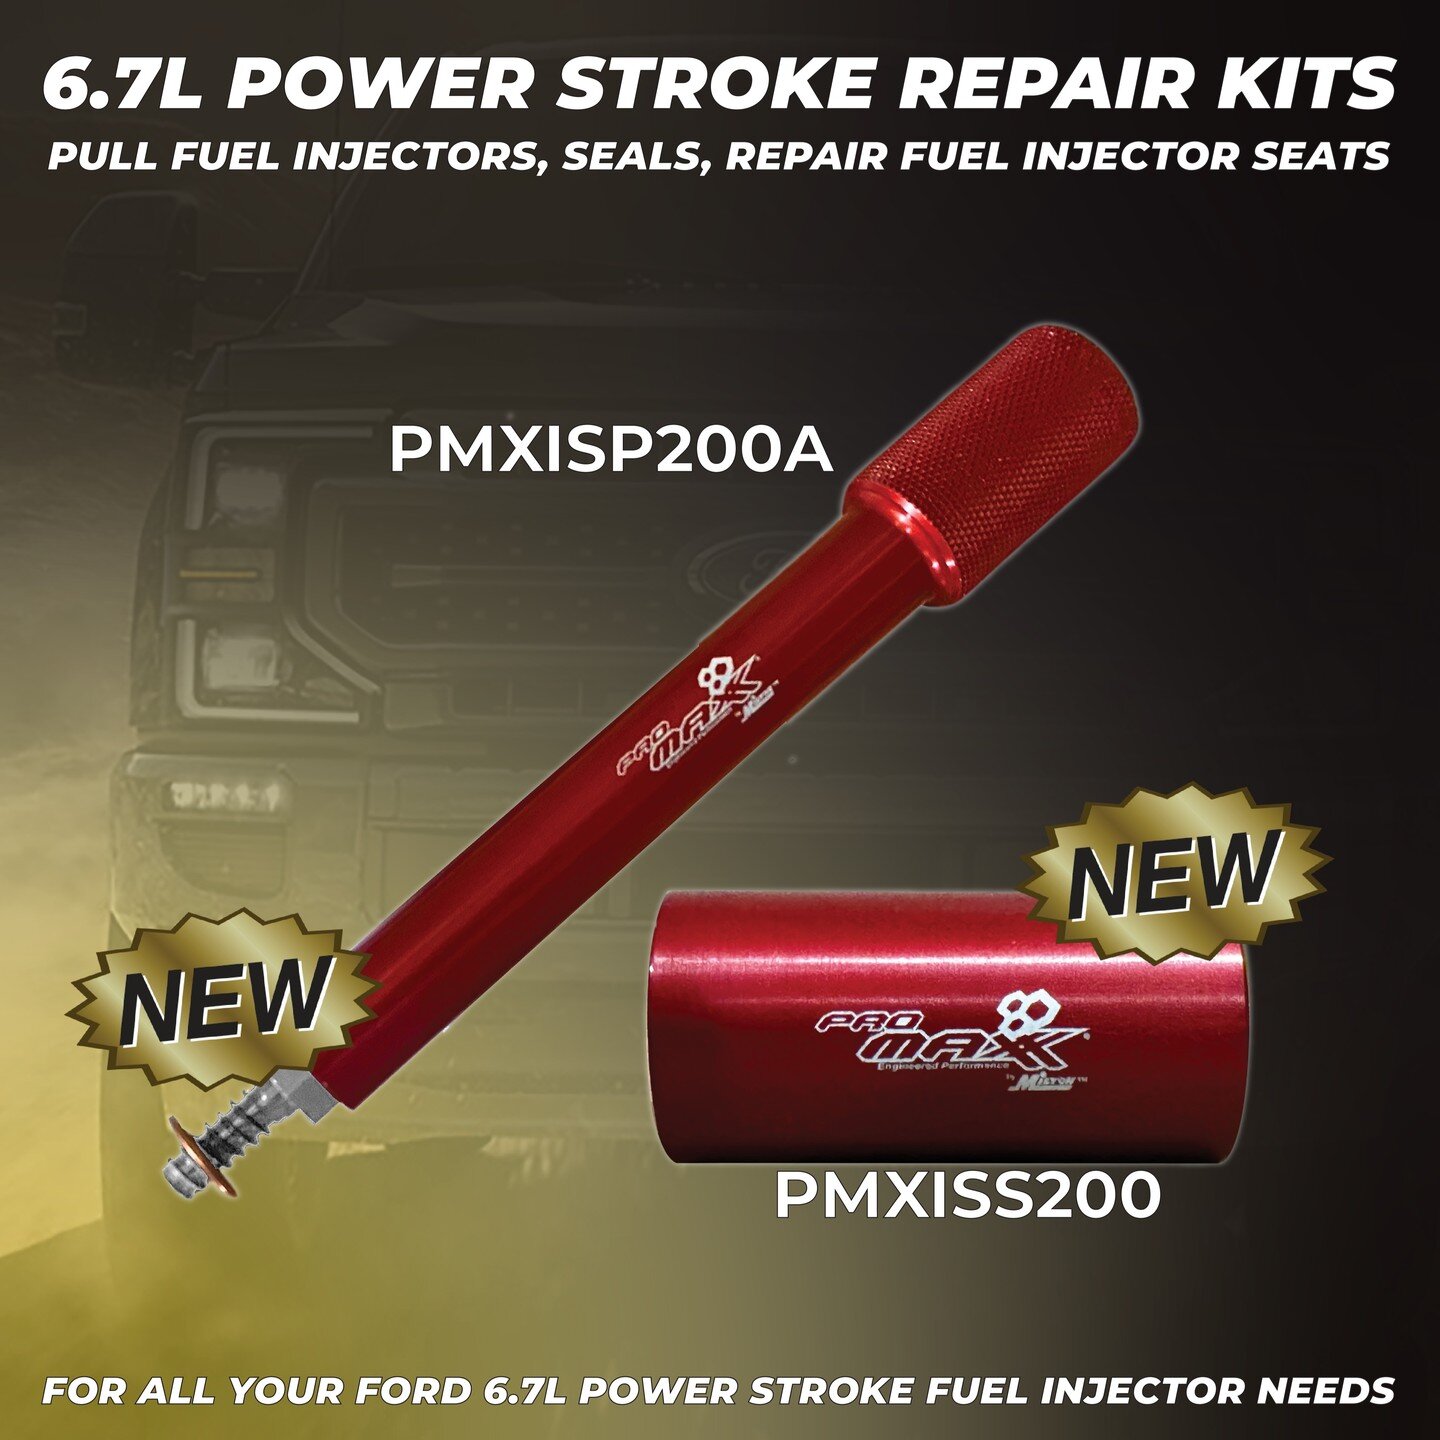 Introducing the NEW Ford 6.7L Power Stroke Fuel Injector Seal Puller and Saver! Say goodbye to injector seal complications with this revolutionary tool! No more struggling with stuck washers in the cylinder head &ndash; our tool makes removal a breez